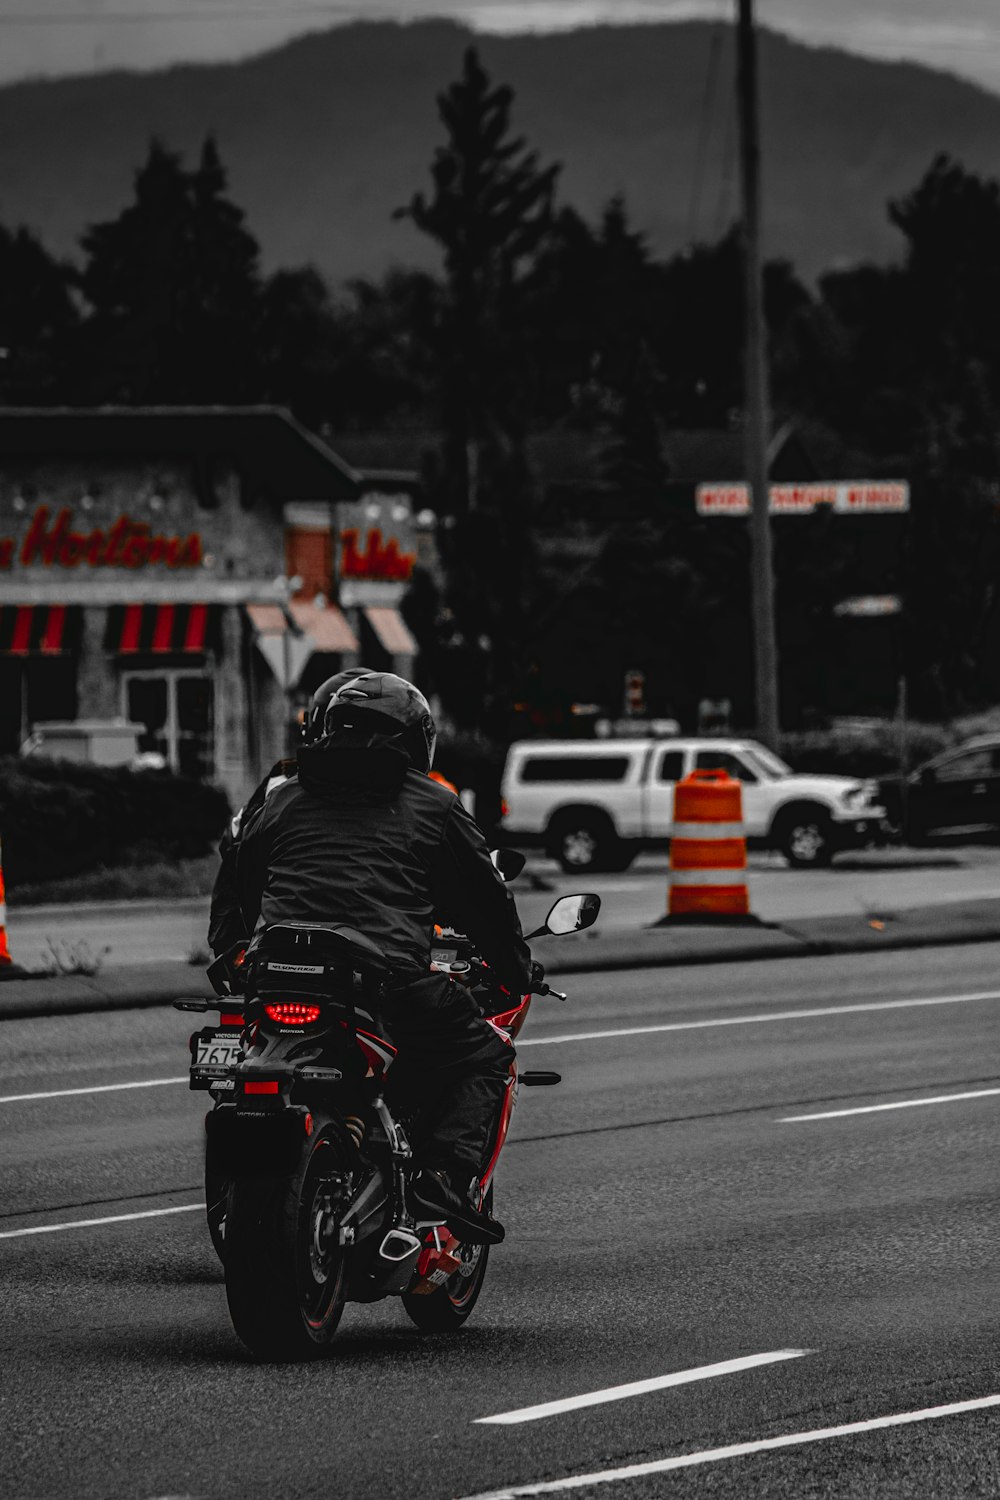 a person riding a motorcycle